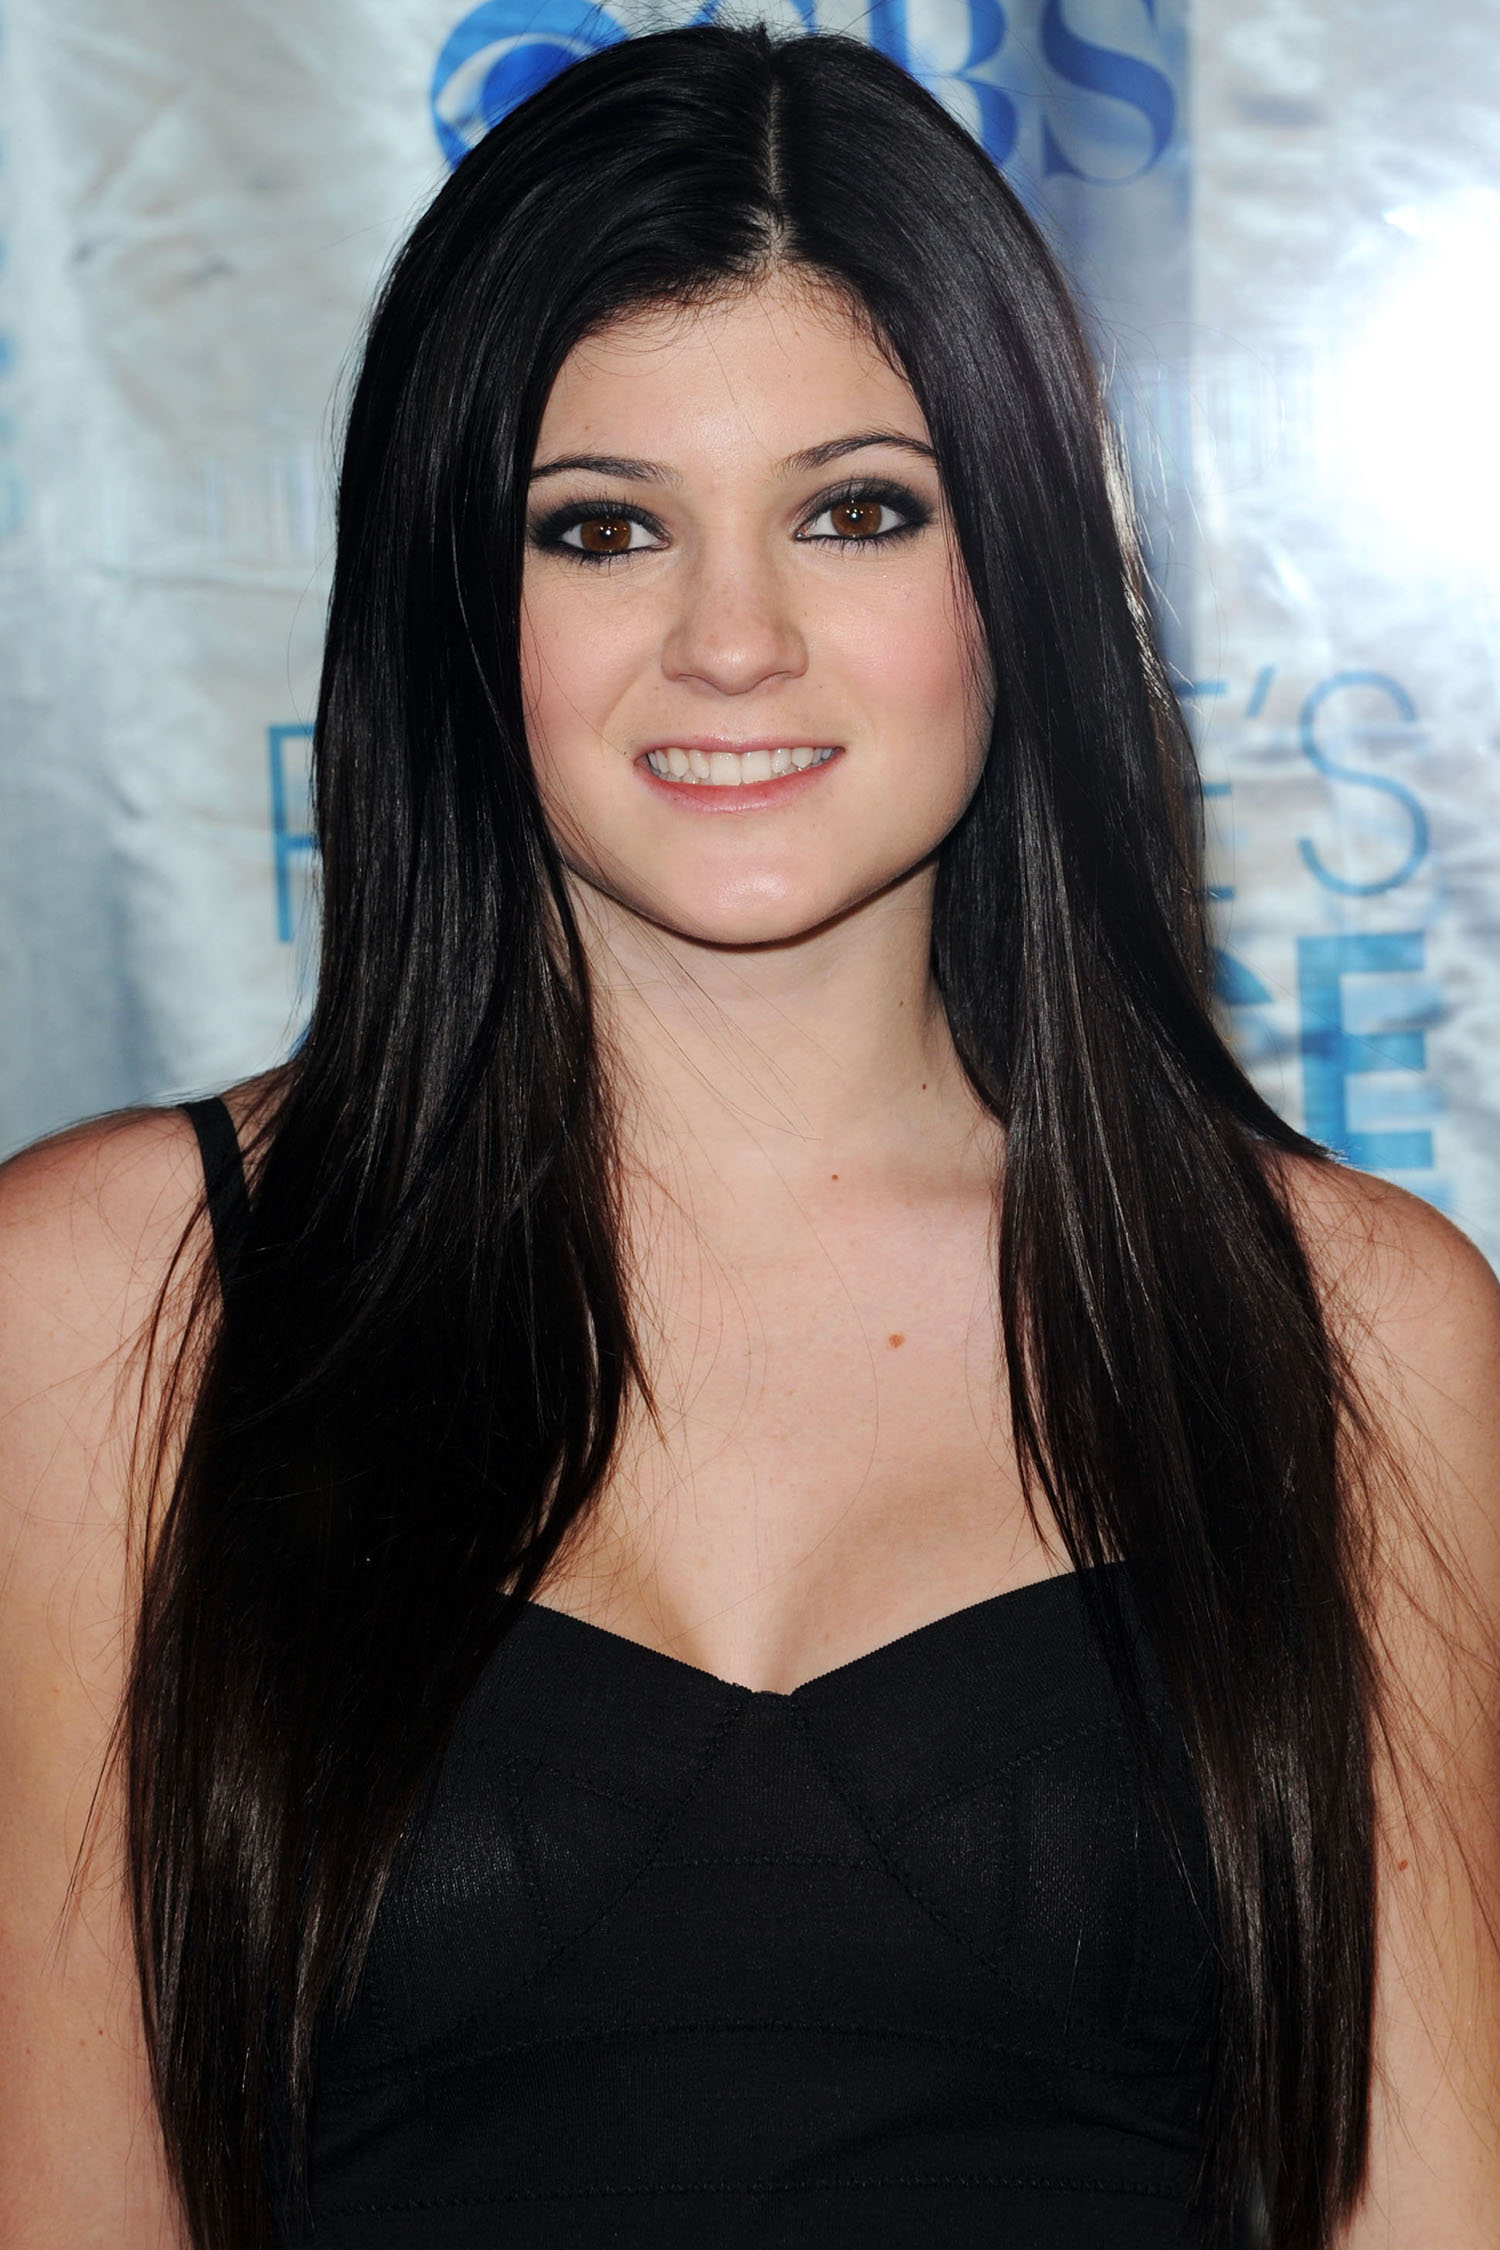 Kylie Jenner - American Television Personality